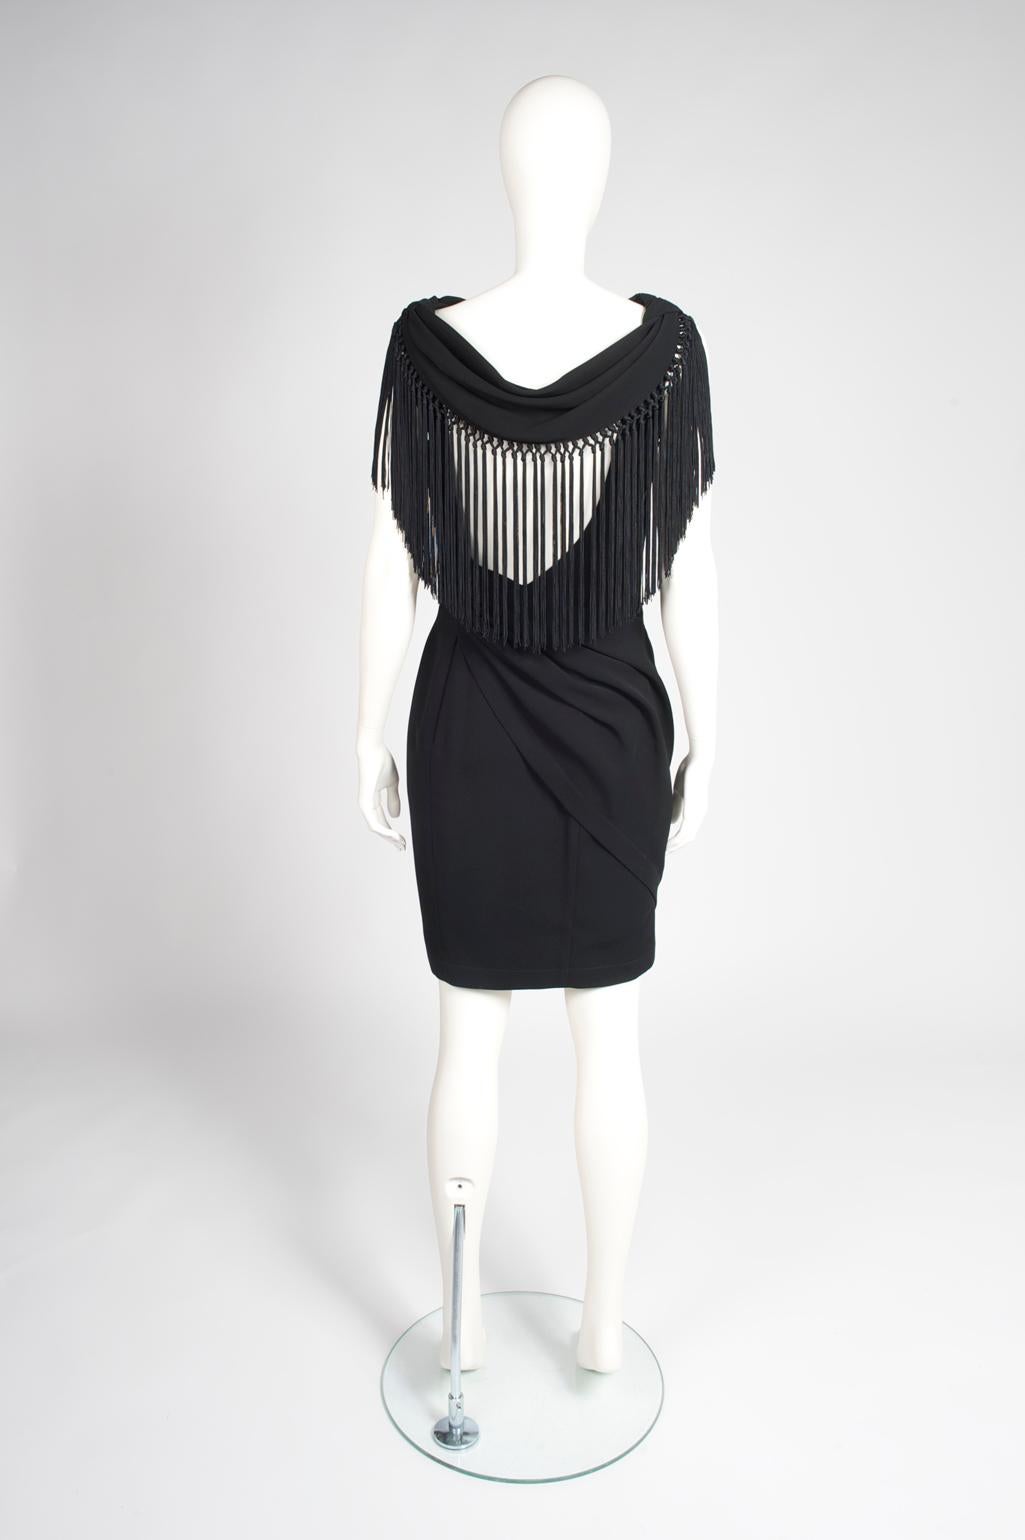 Brilliantly constructed, this late 90s Thierry Mugler is a wonderful example of his work. Cut from soft black viscose, the dress is artfully draped and gathered to produce a wrapping effect around the body, beautifully emphasizing feminine curves.